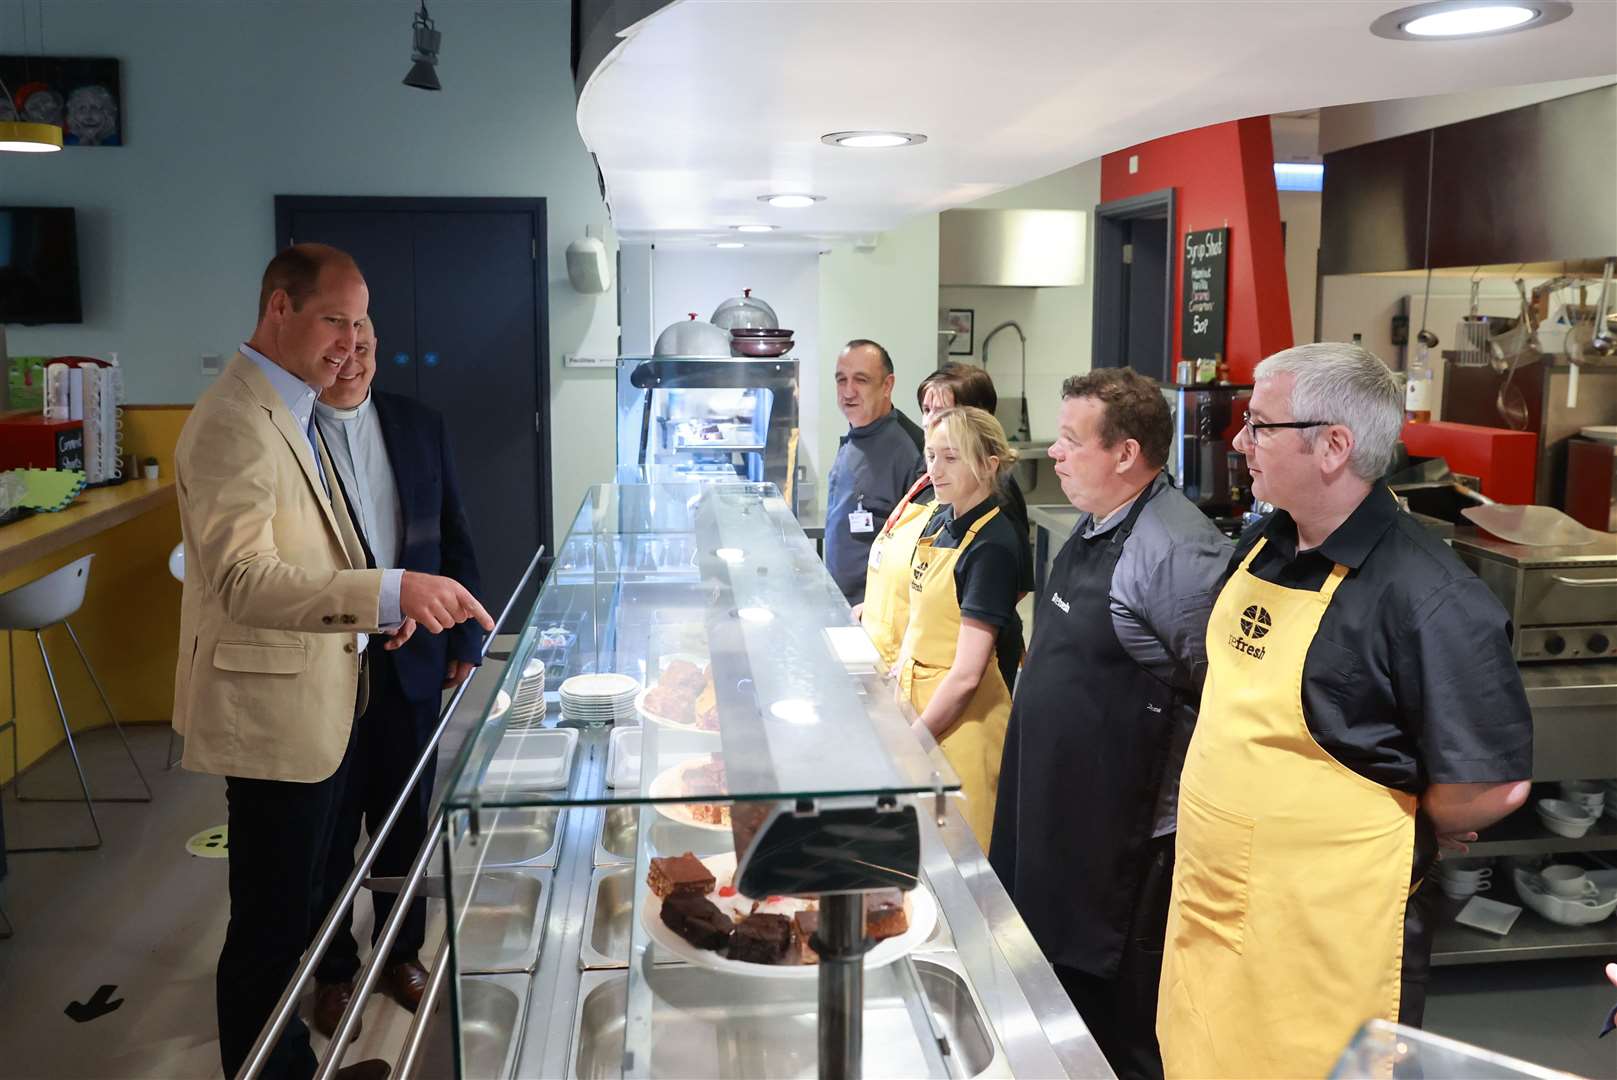 The Prince of Wales meeting members of the of at the Refresh Cafe during a visit to the East Belfast Mission at the Skainos Centre, Belfast, as part of his tour of the UK to launch a project aimed at ending homelessness (Liam McBurney/PA)